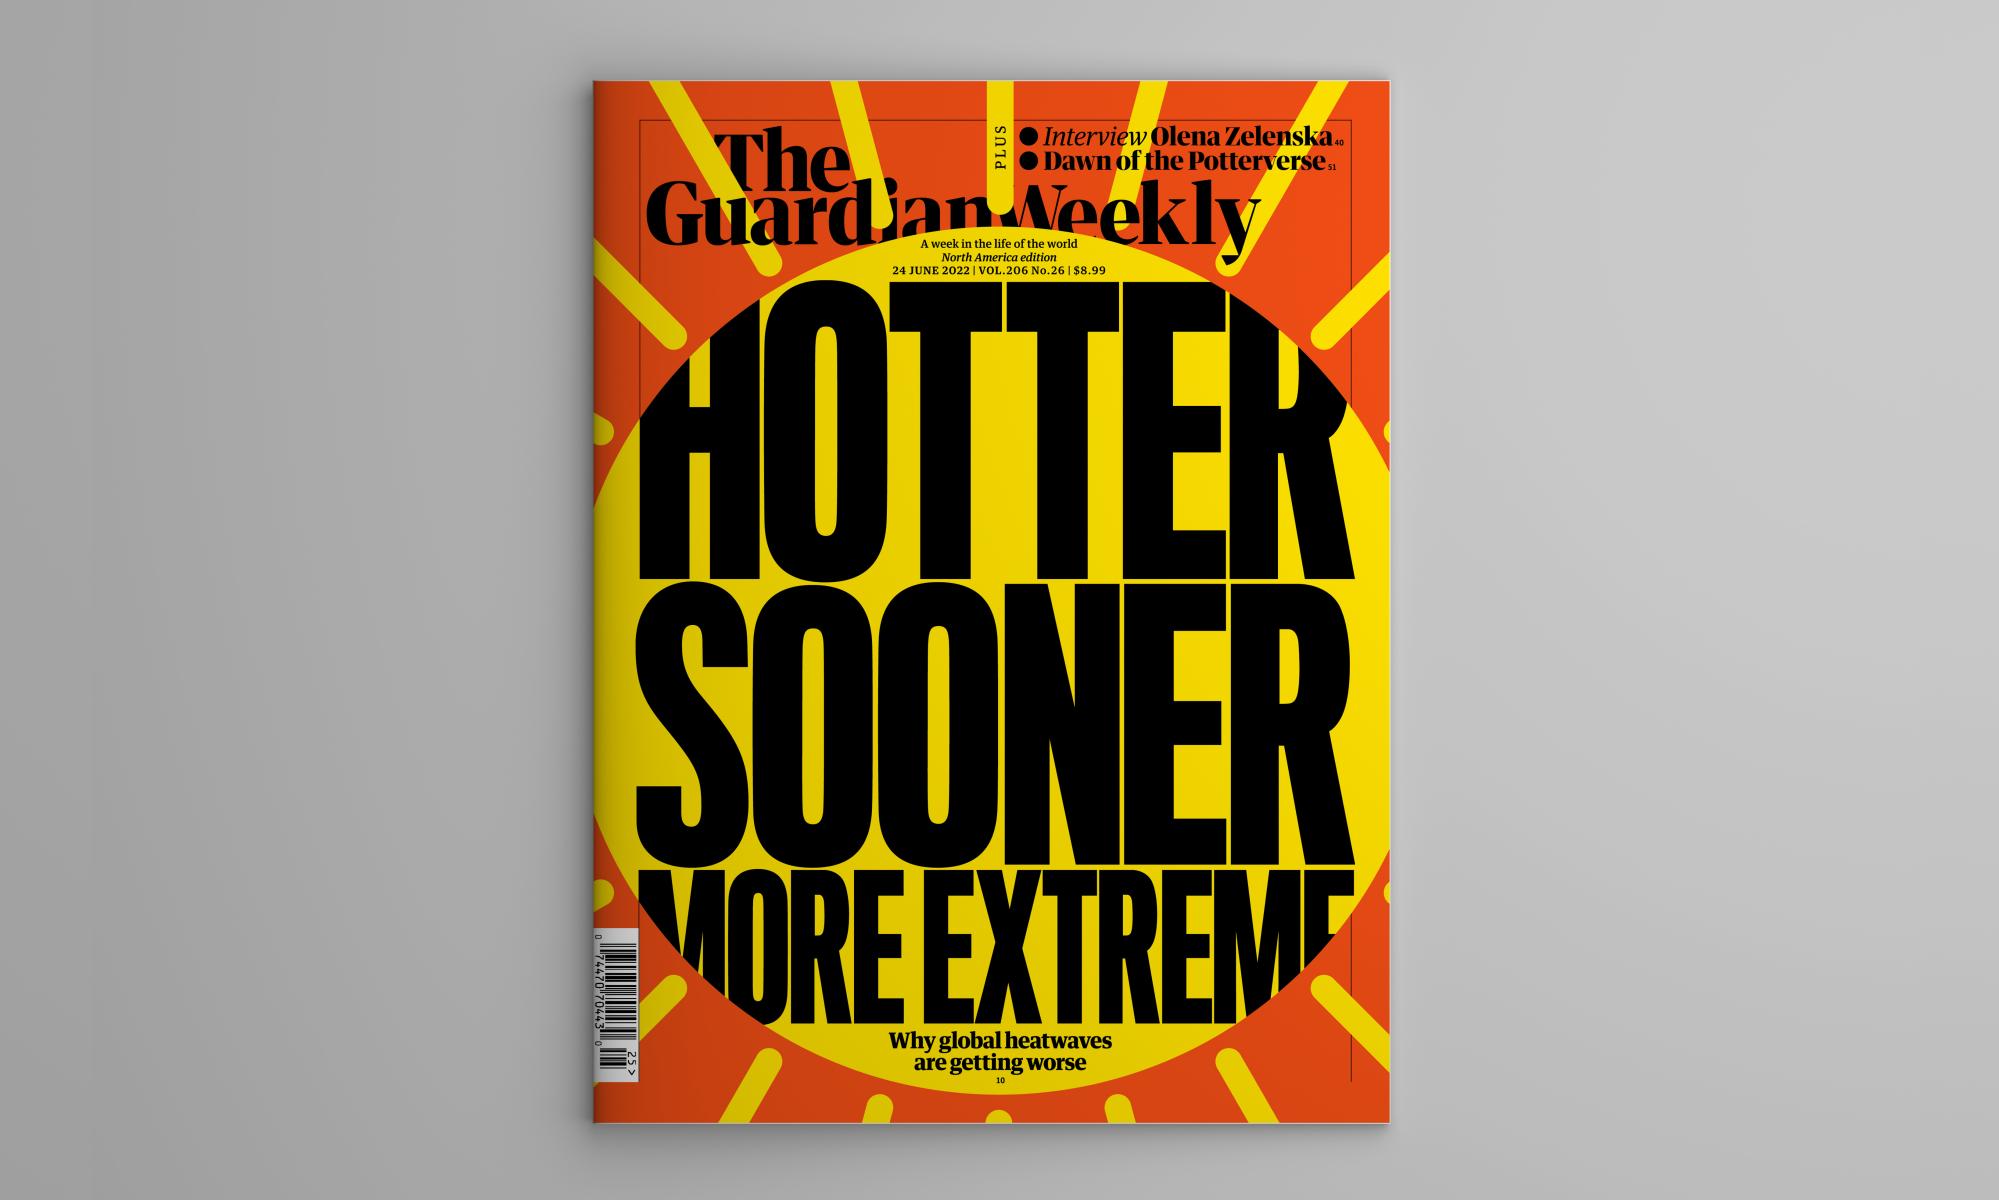 Hotter and hotter: Inside the 24 June Guardian Weekly